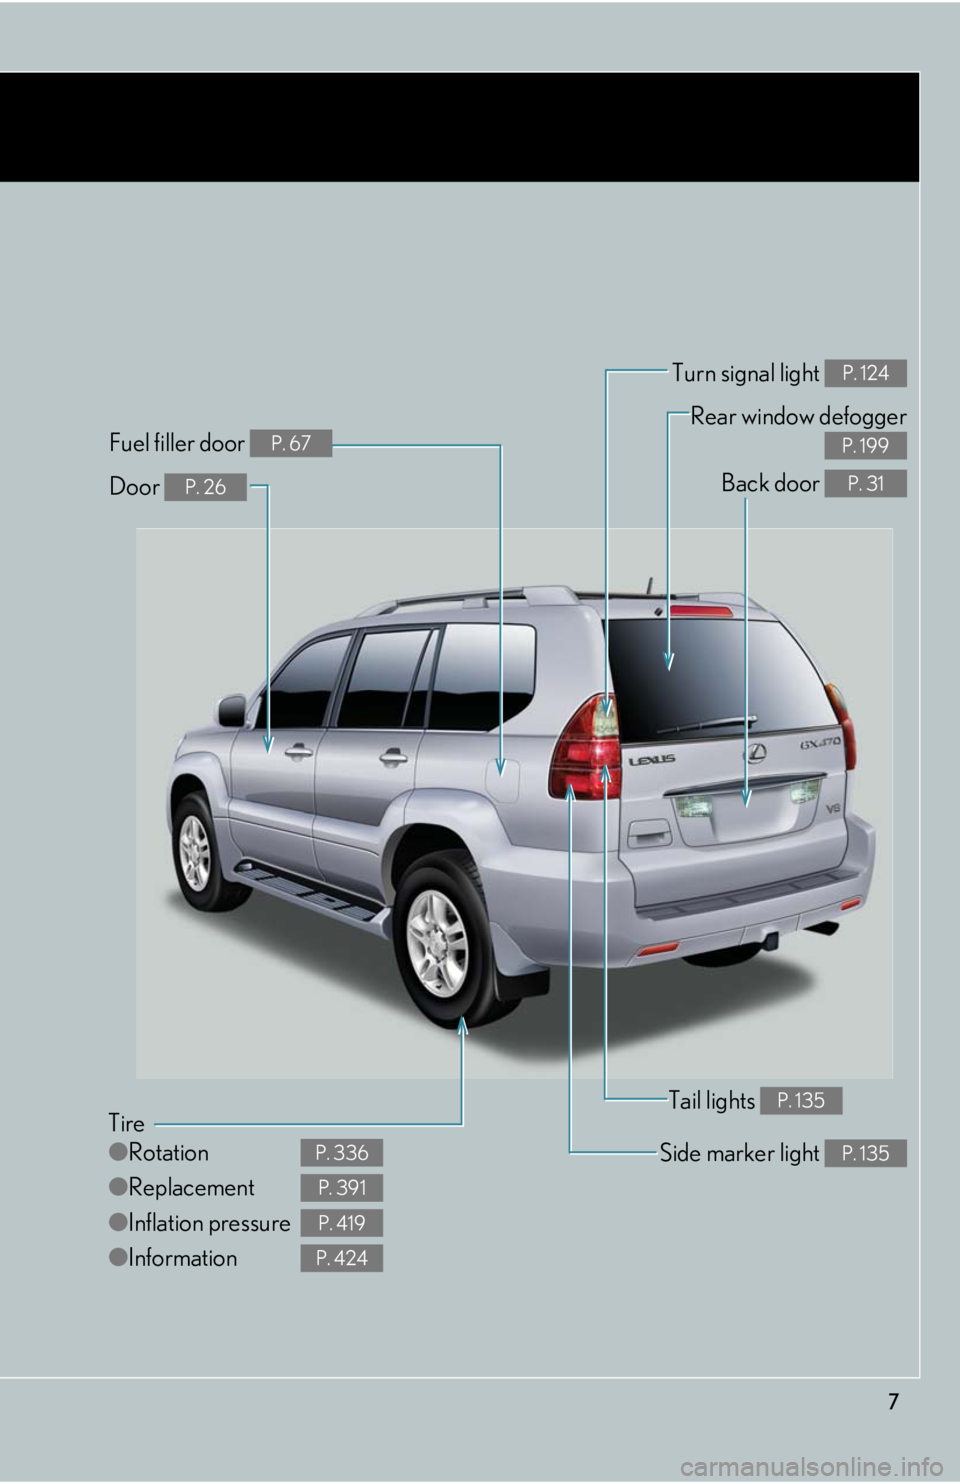 Lexus GX470 2008  Using other driving systems / LEXUS 2008 GX470 OWNERS MANUAL (OM60D82U) 7
Tire
●Rotation
● Replacement
● Inflation pressure
● Information
P. 336
P. 391
P. 419
P. 424
Tail lights P. 135
Side marker light P. 135
Back door P. 31
Rear window defogger
 
P. 199
Door P. 